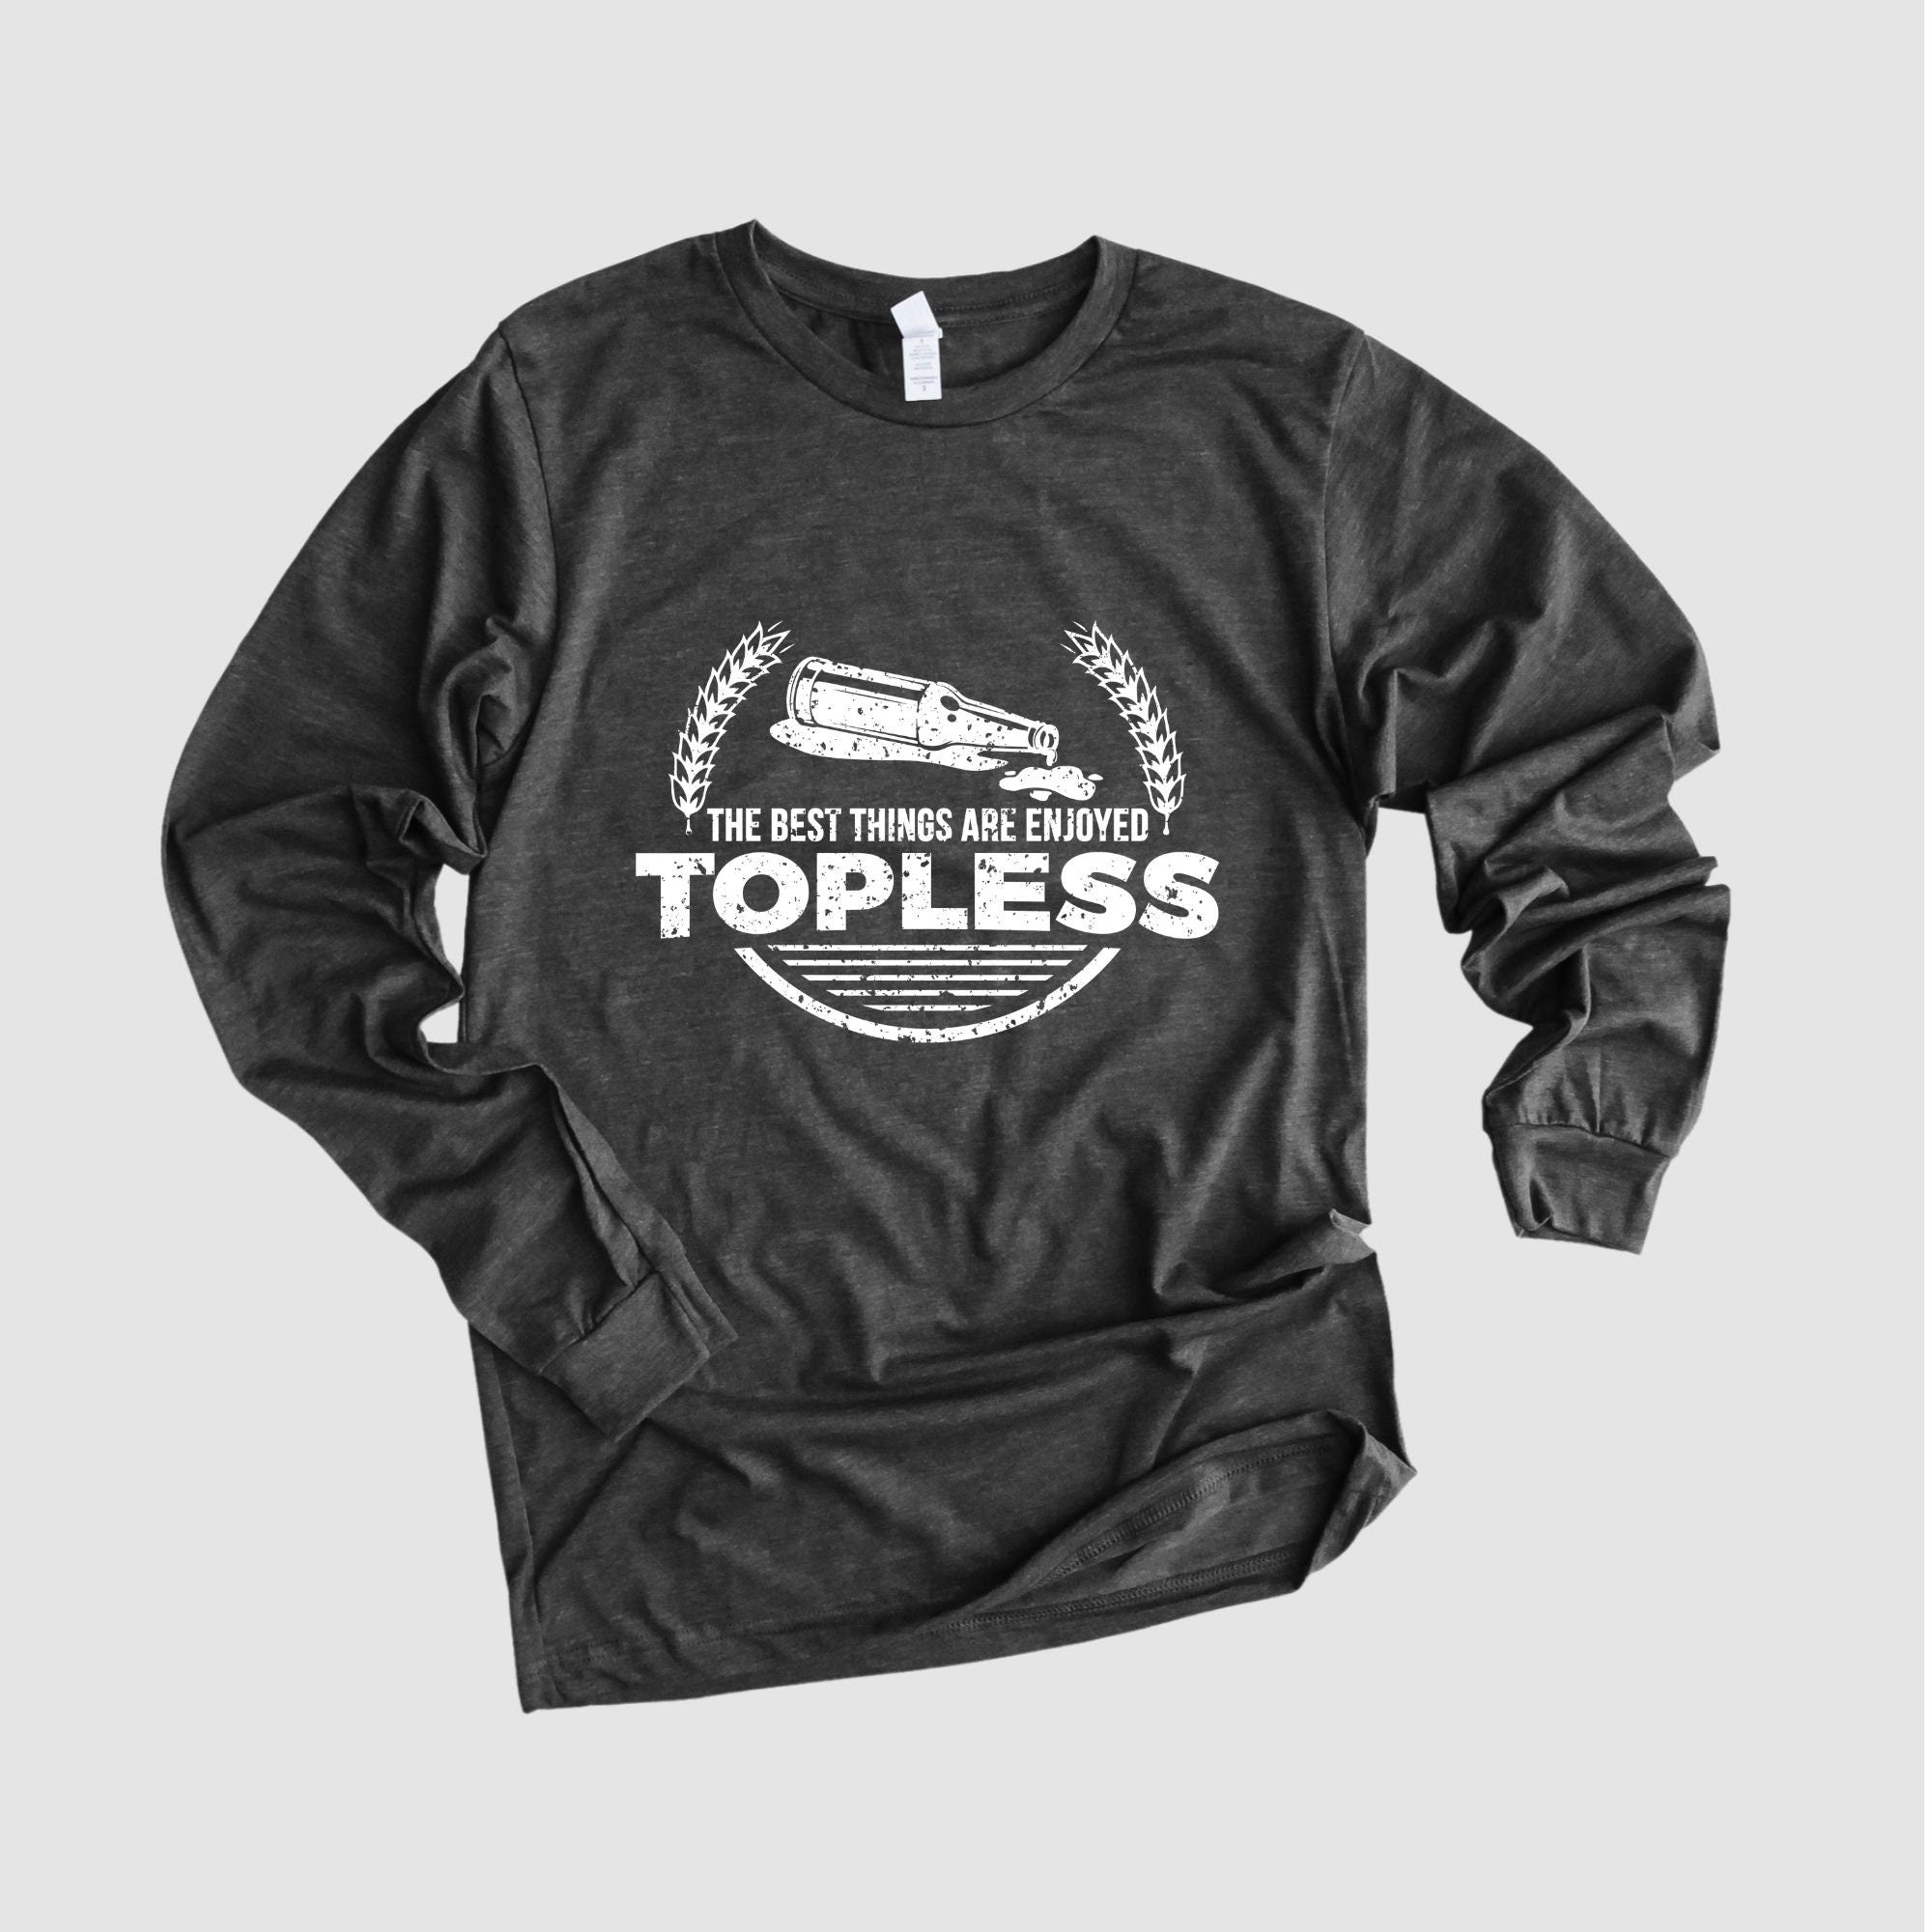 Beer Shirt, Topless T Shirt, Gift for Dad, Gift for Husband *UNISEX FIT*-Long Sleeves-208 Tees Wholesale, Idaho